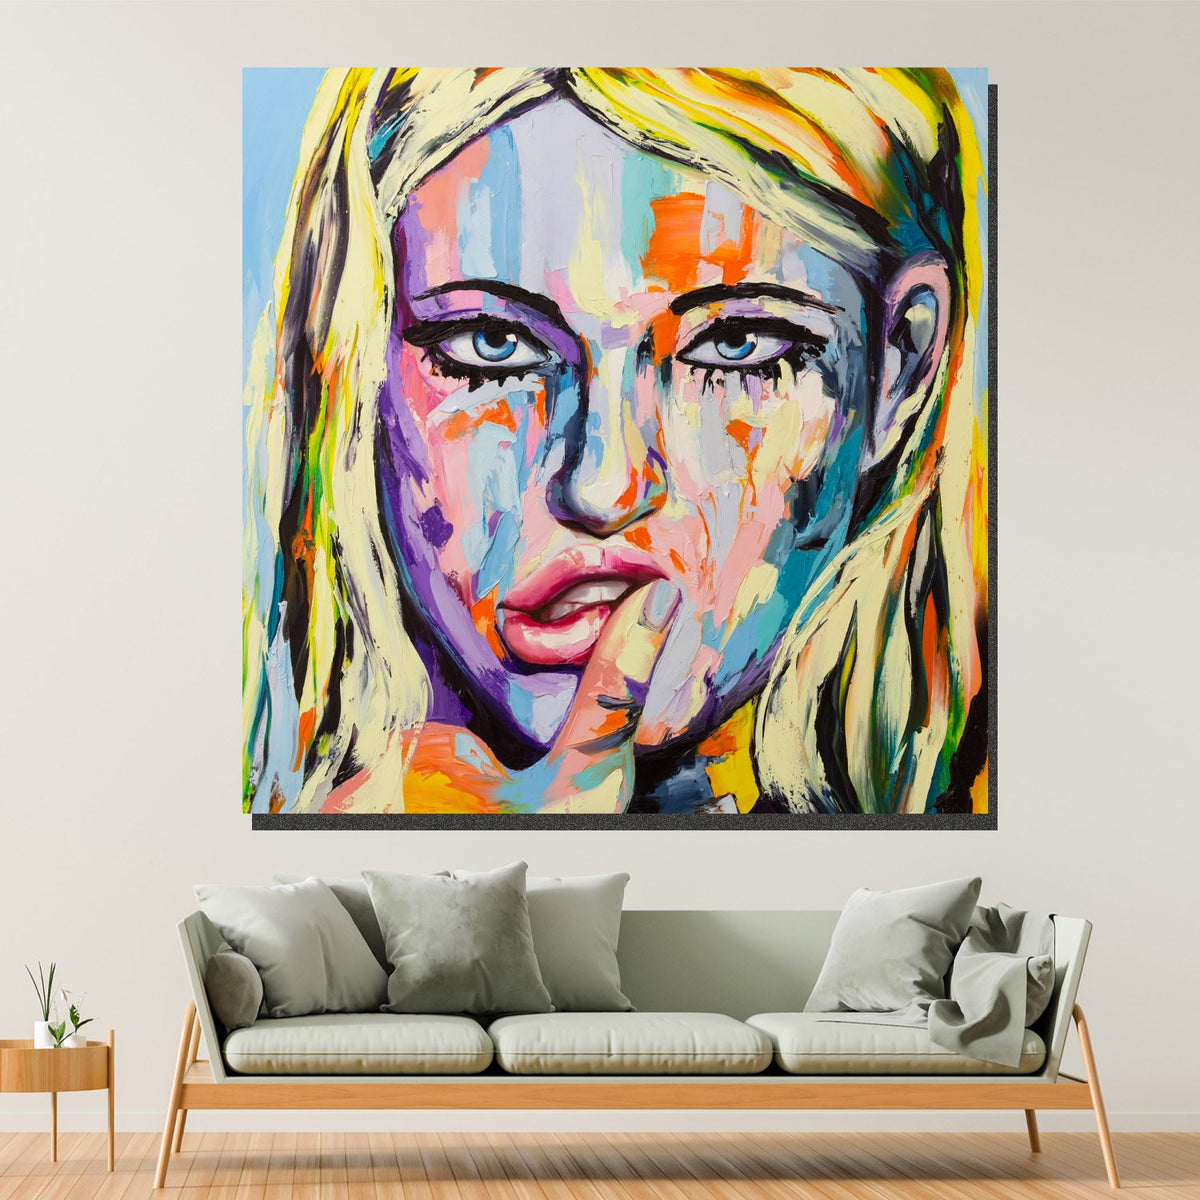 https://cdn.shopify.com/s/files/1/0387/9986/8044/products/ResilienceCanvasArtprintStretched-2.jpg